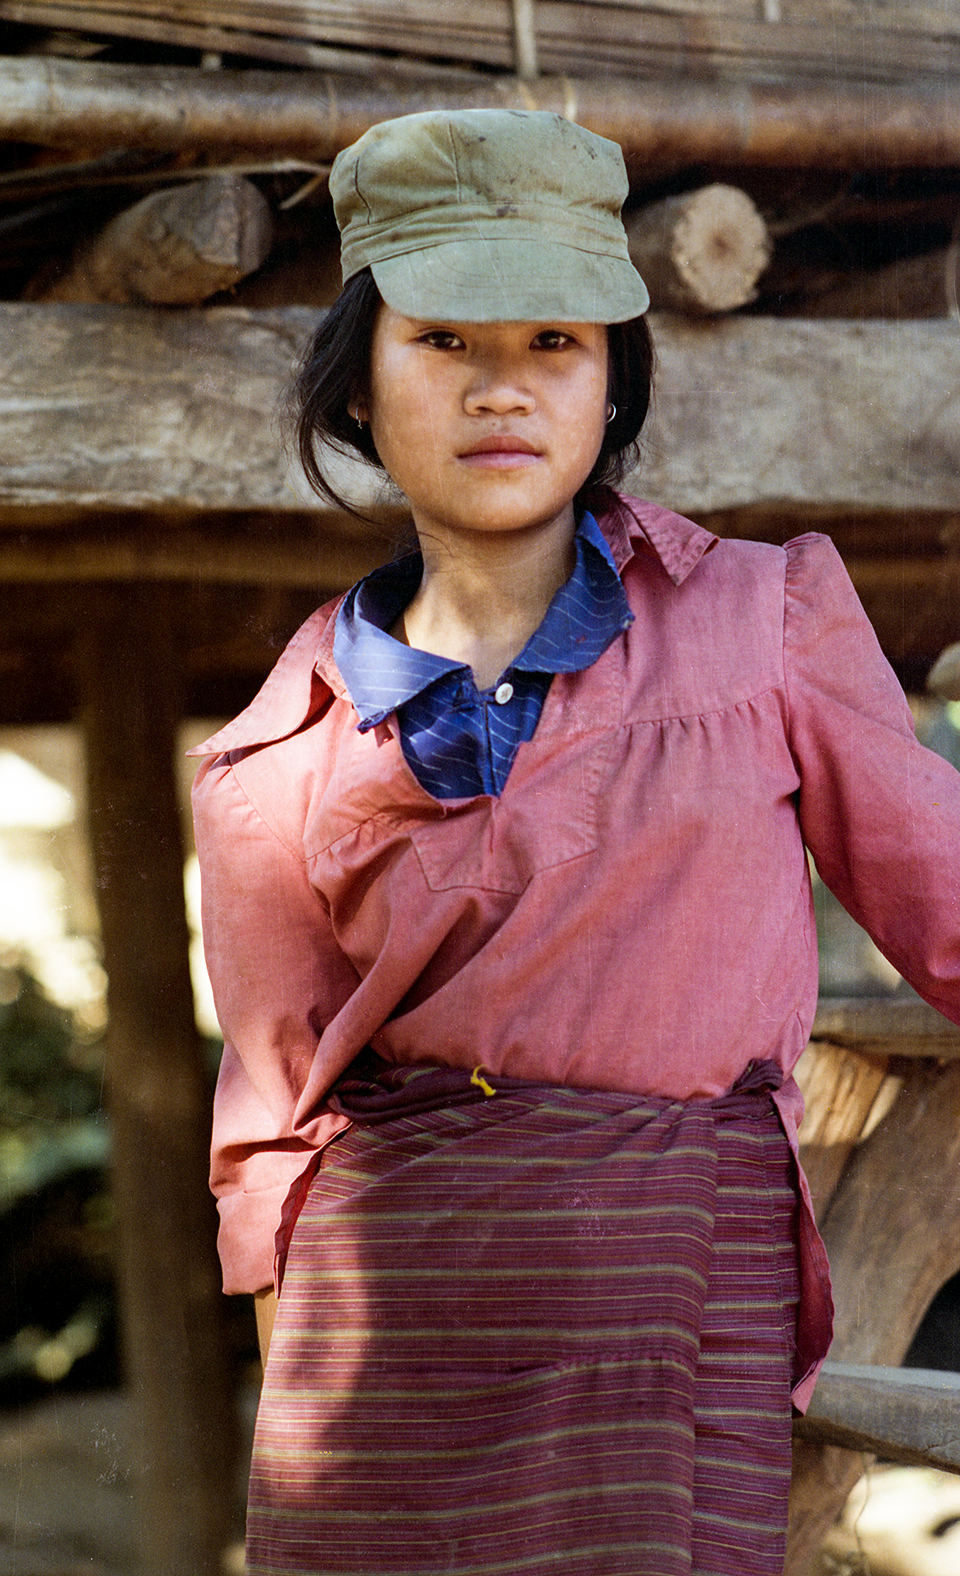 The Green Hat, Laos